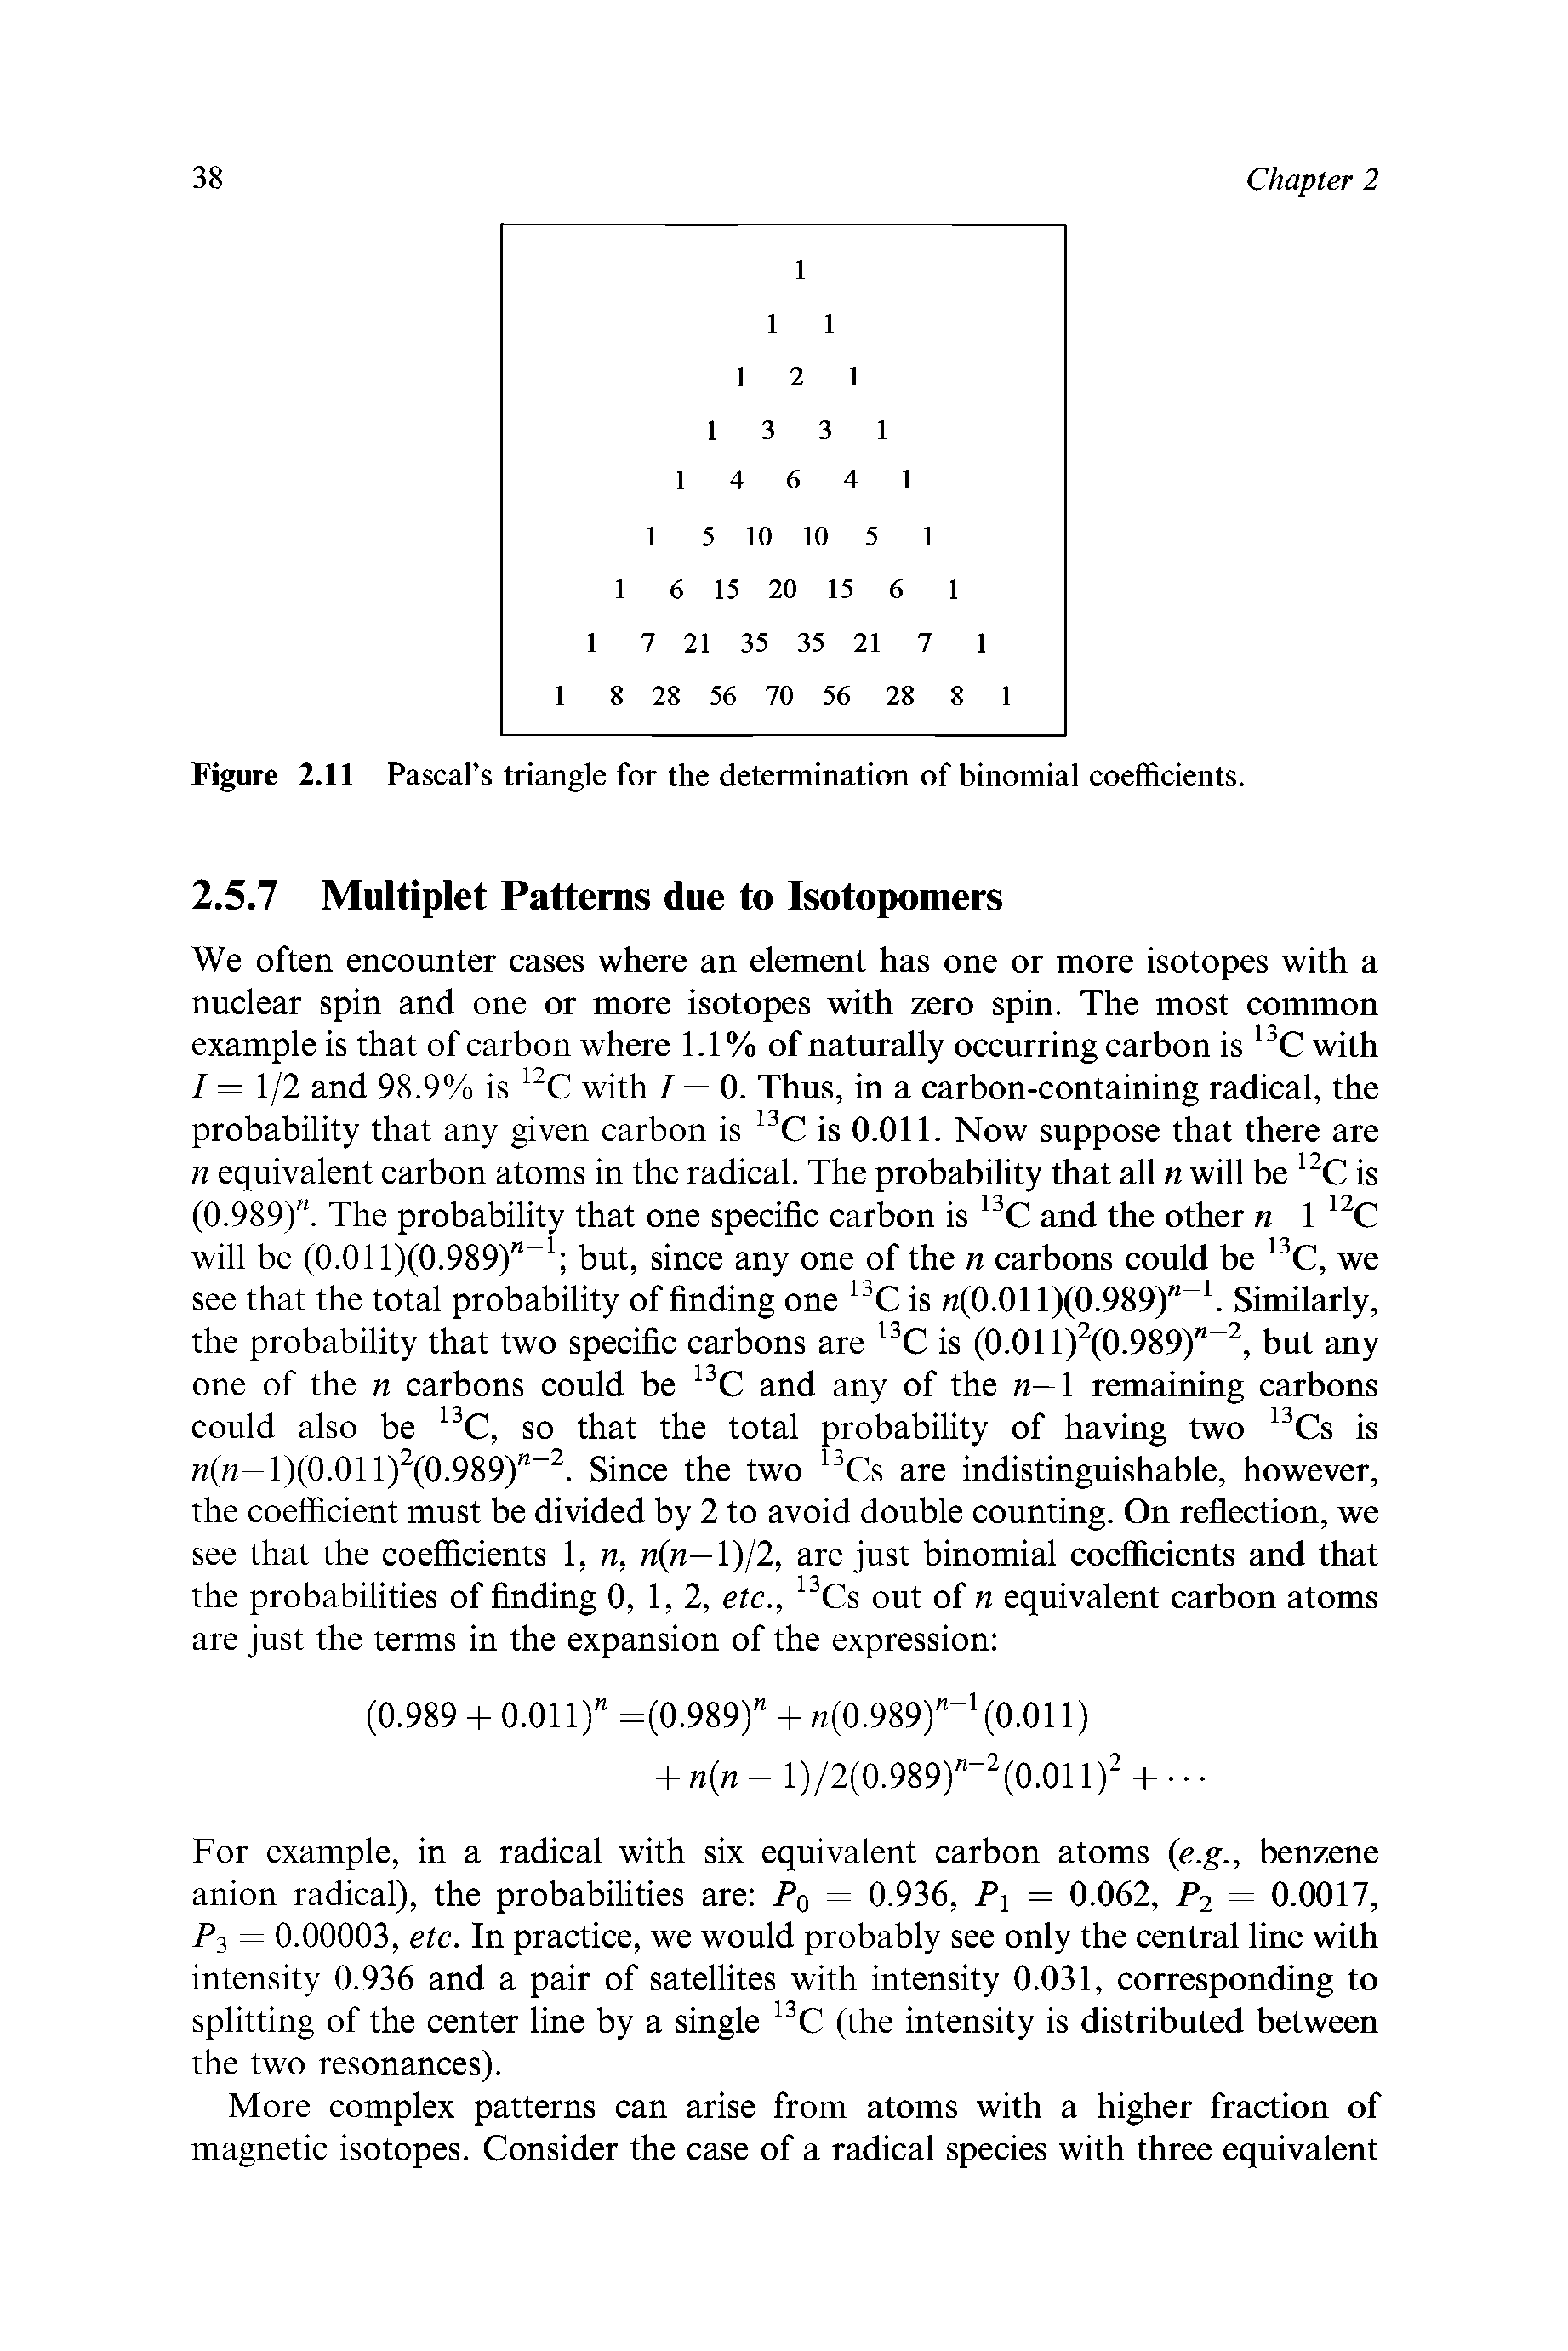 Figure 2.11 Pascal s triangle for the determination of binomial coefficients.